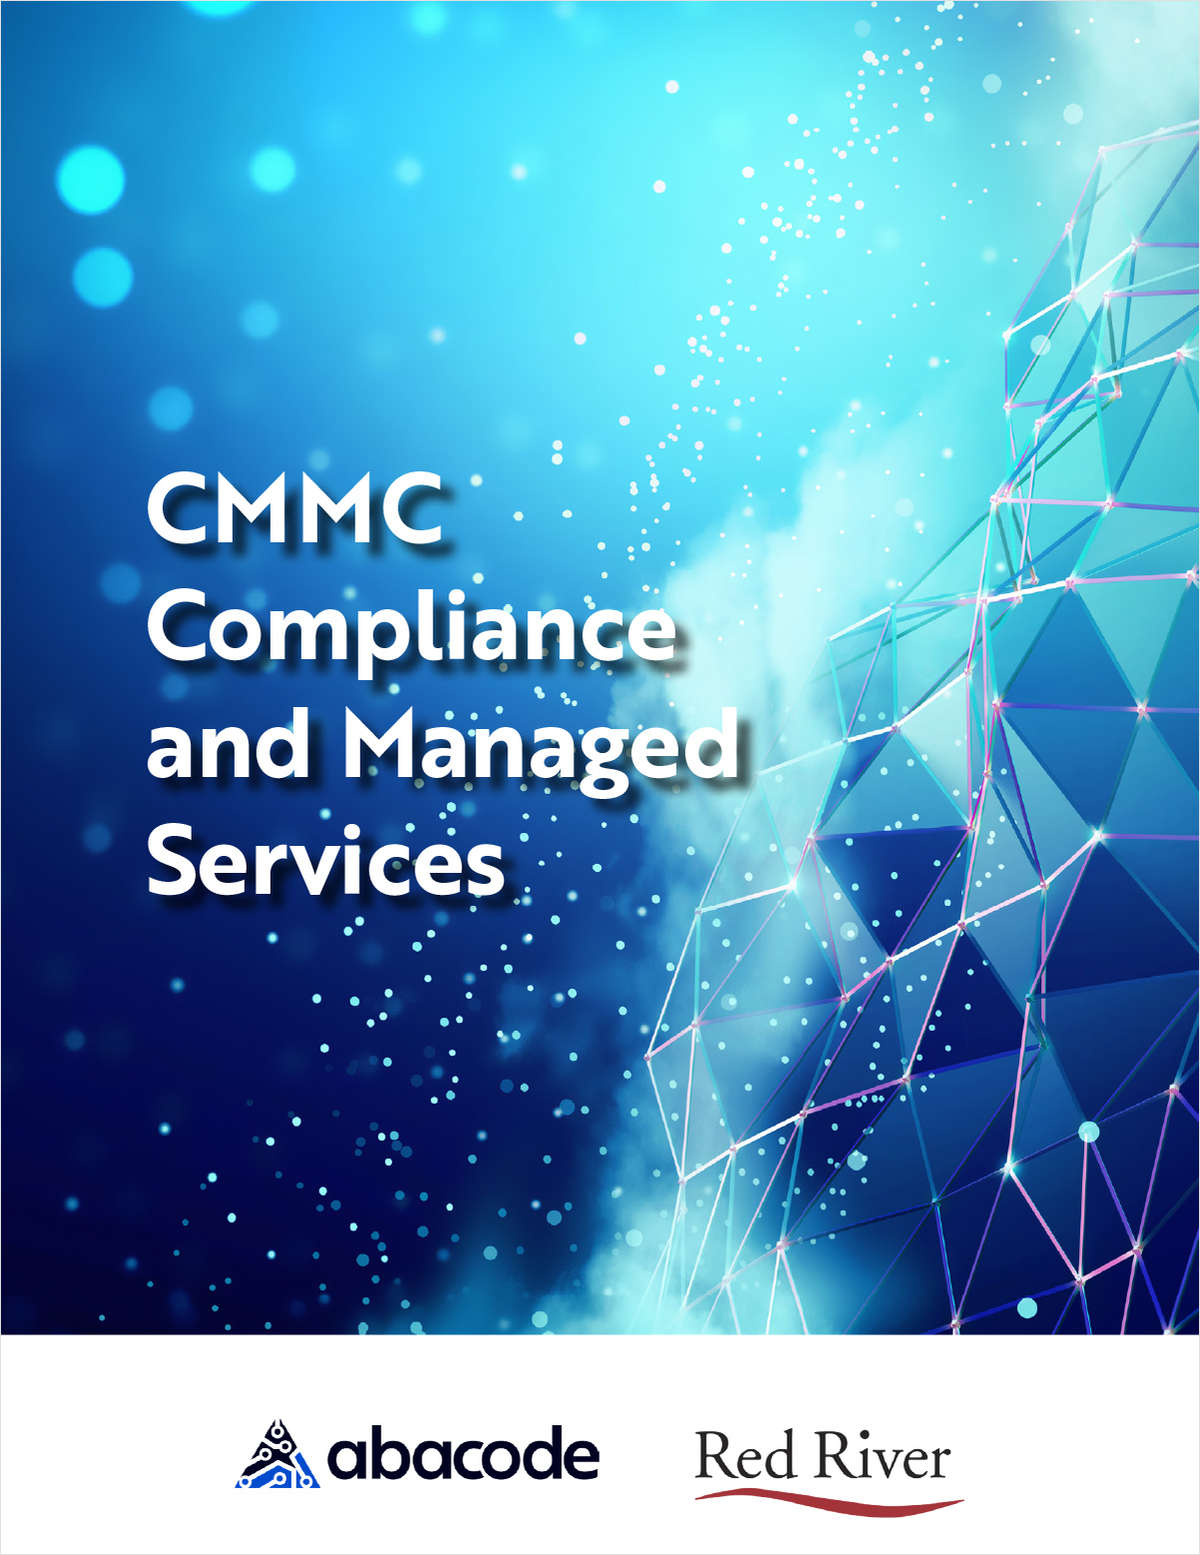 CMMC Compliance and Managed Services